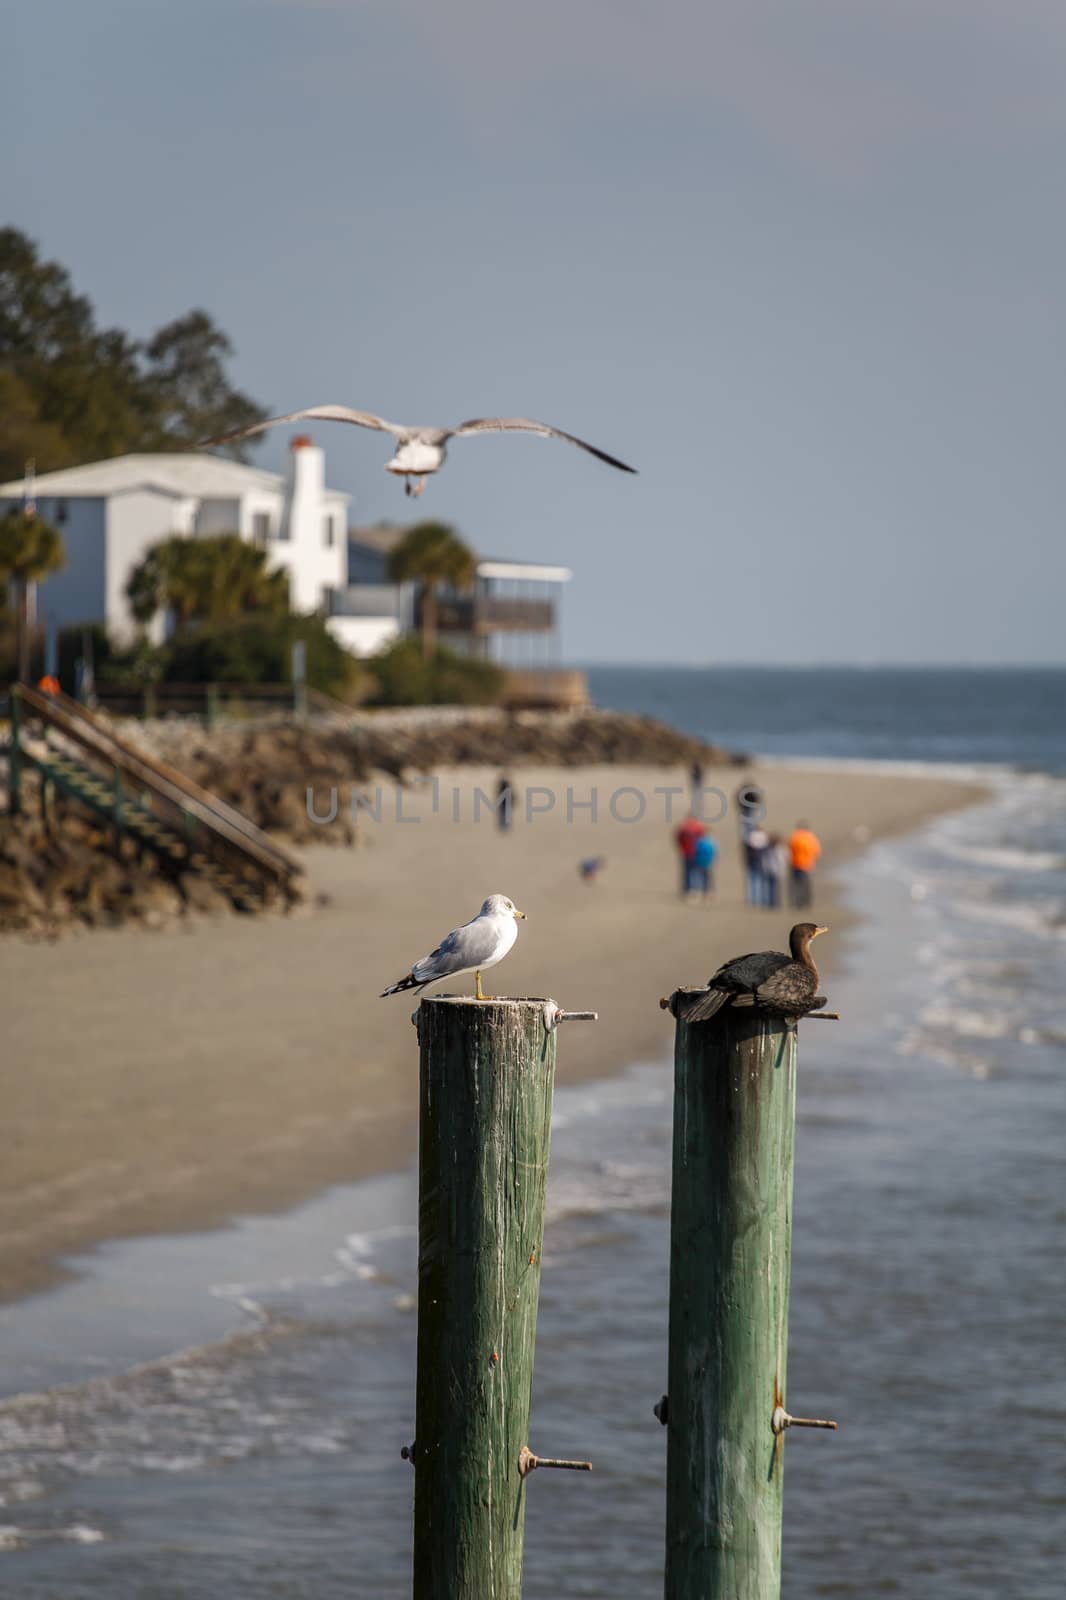 Seagull Flying Over Birds on Pilings by dbvirago